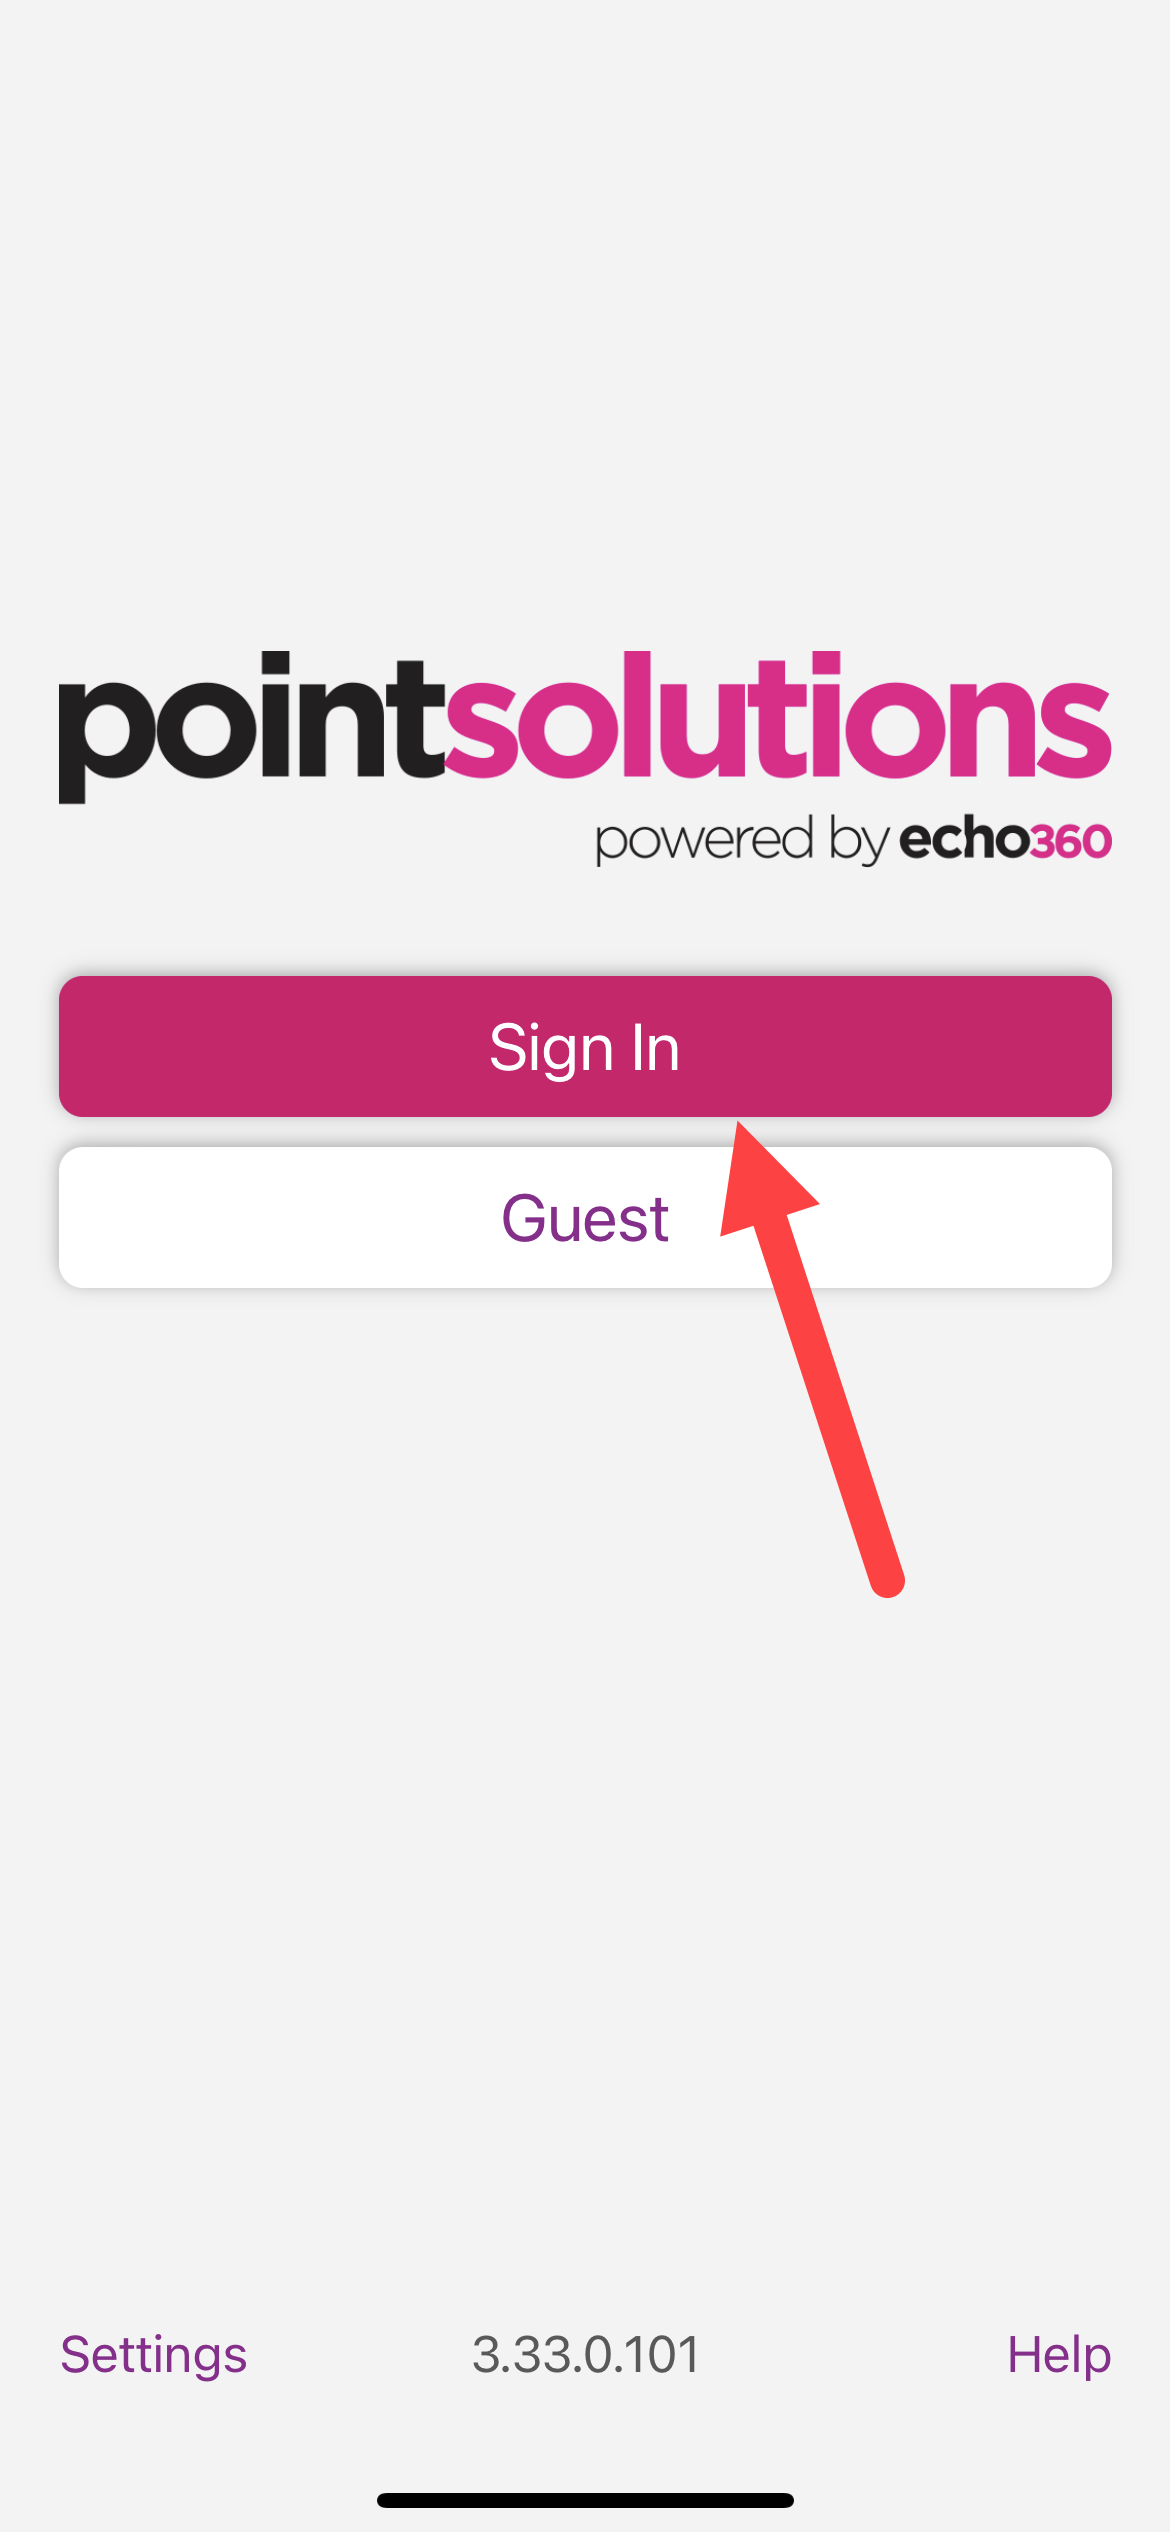 PointSolutions Sign In or Guest screen as described